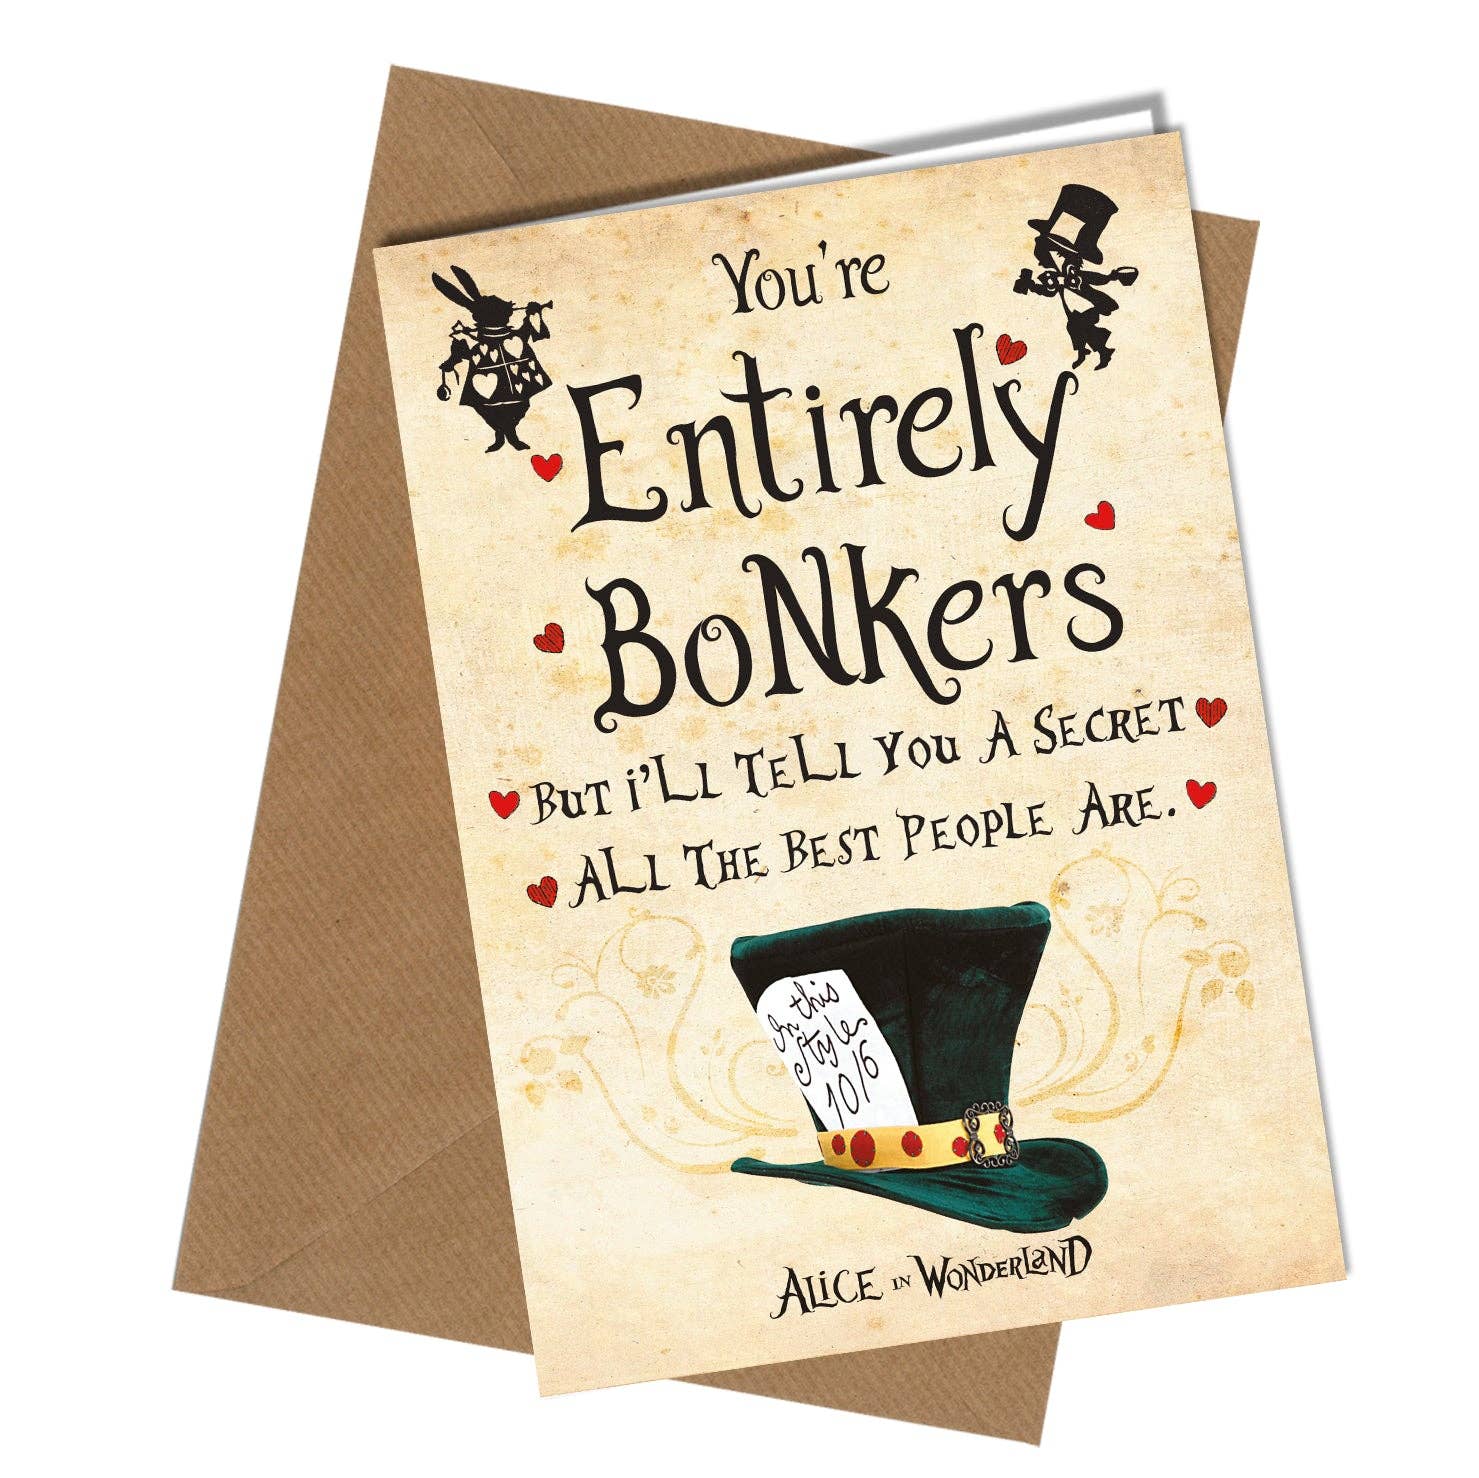 #1552 Entirely Bonkers Close to the Bone Greeting Cards and Gifts